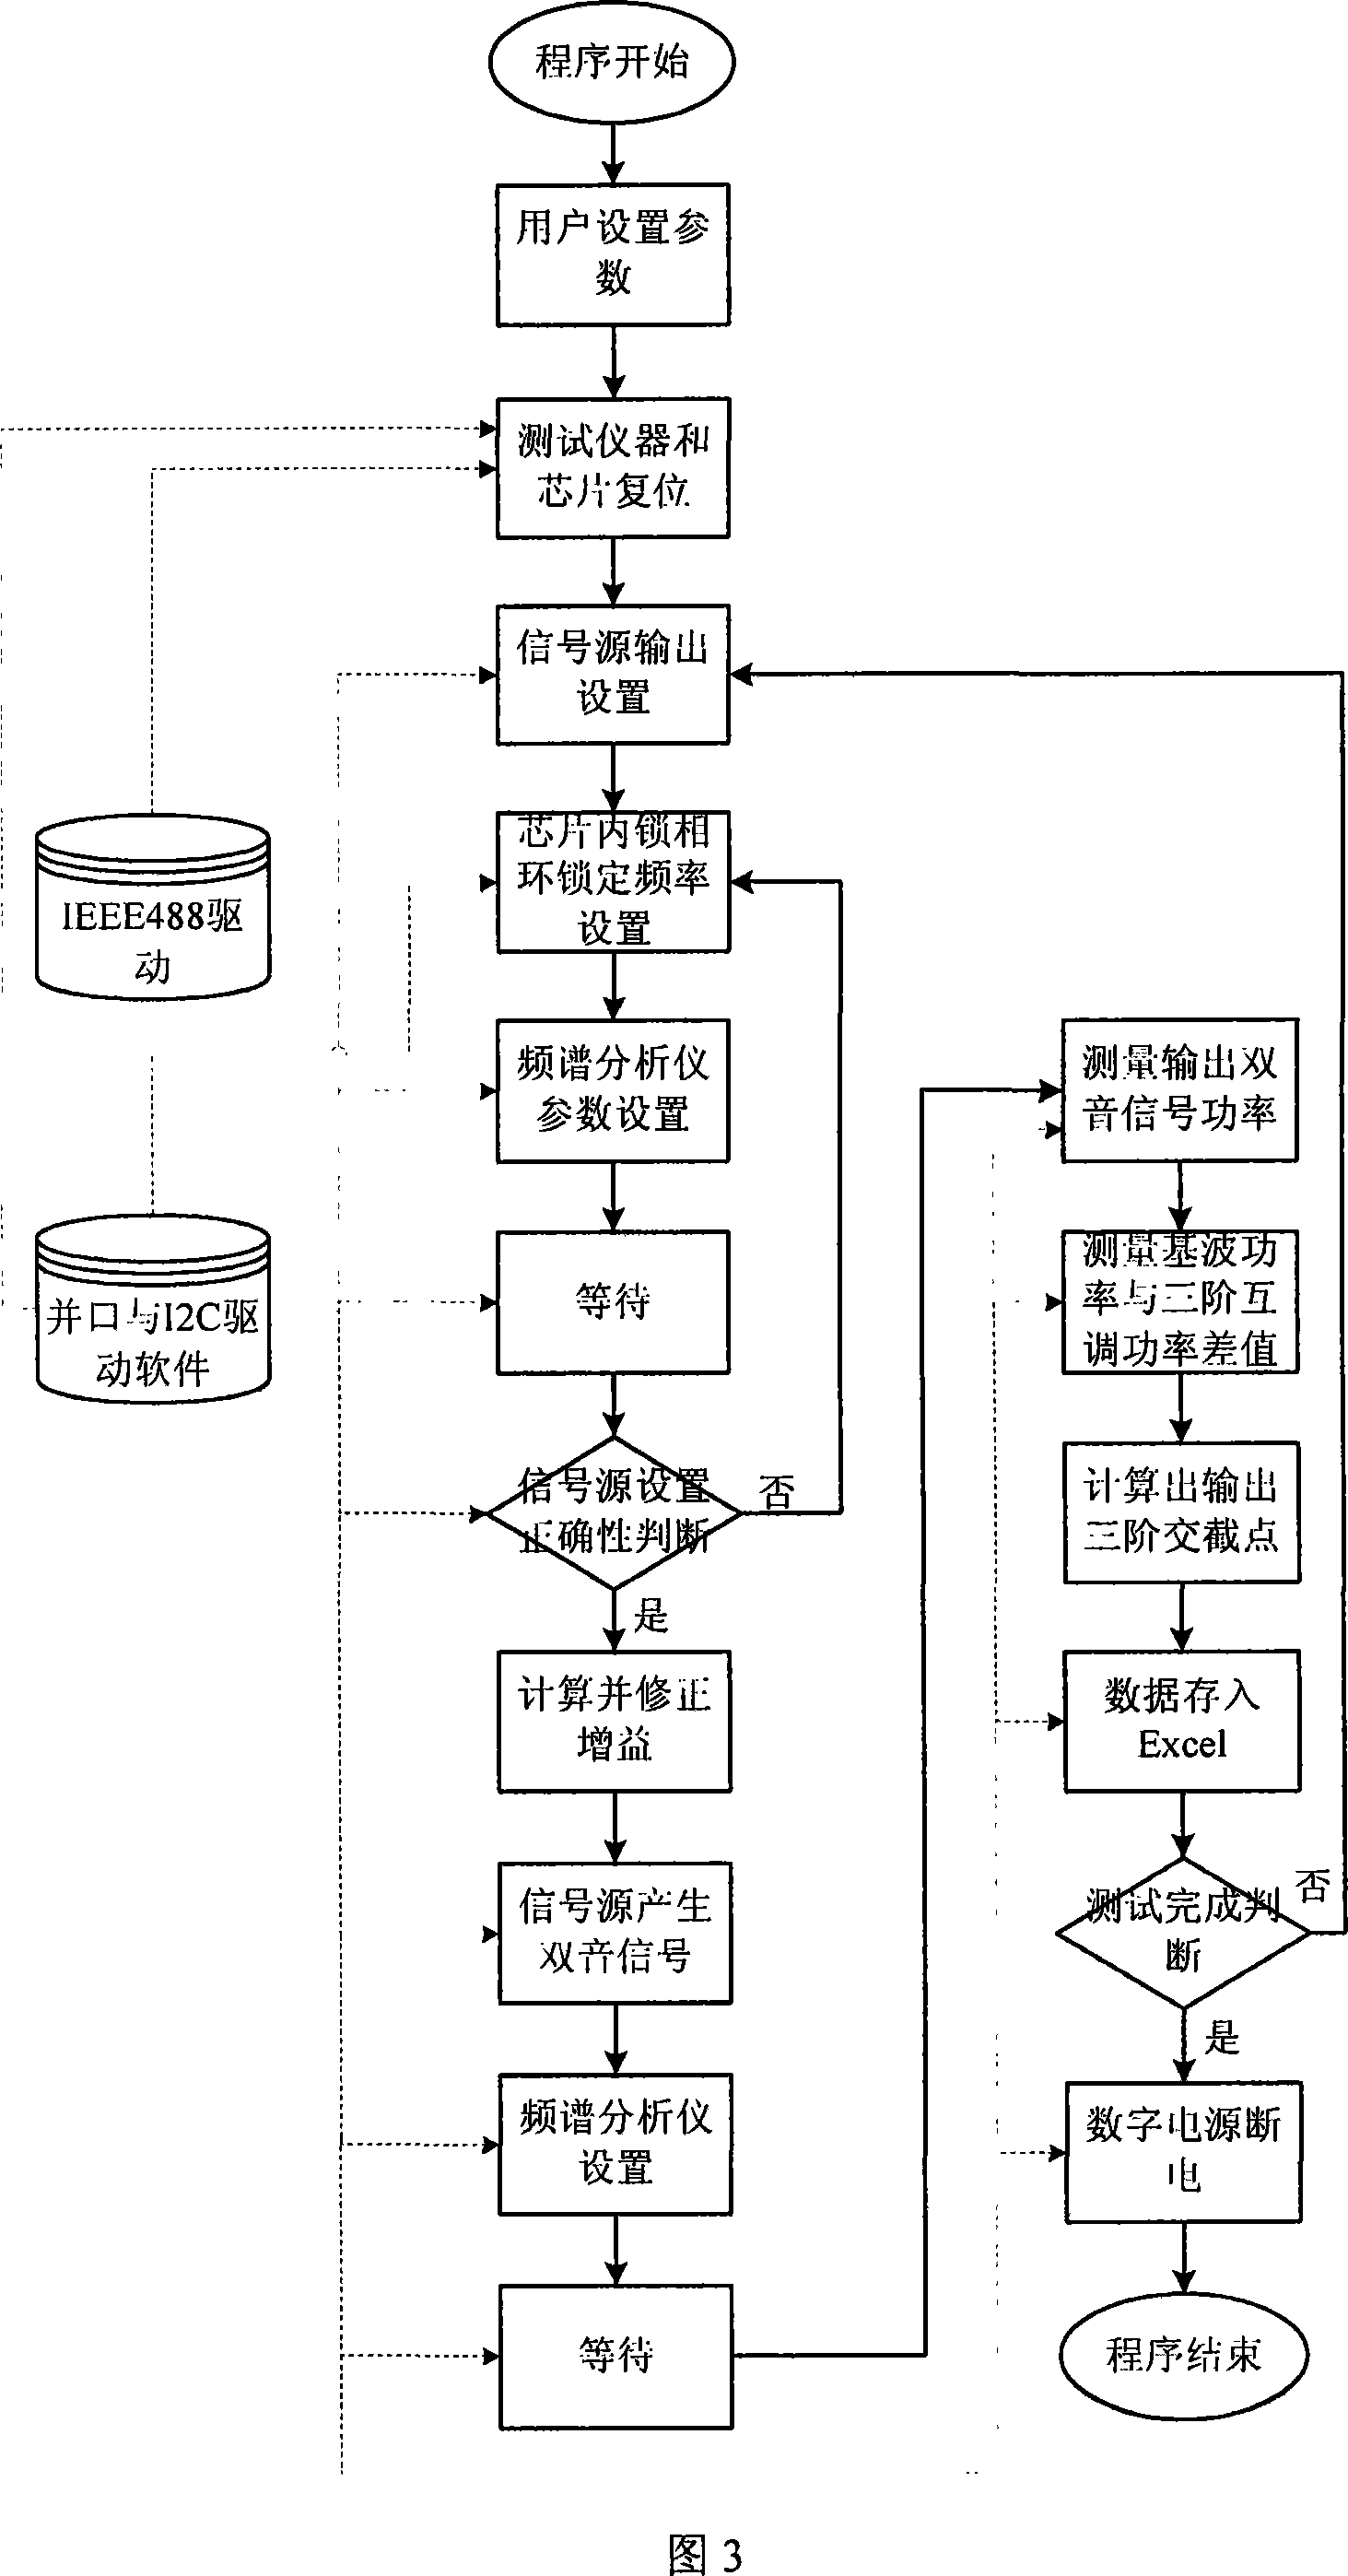 Automatic testing method for mixer third order inter-modulation distortion of radio-frequency tuner chip